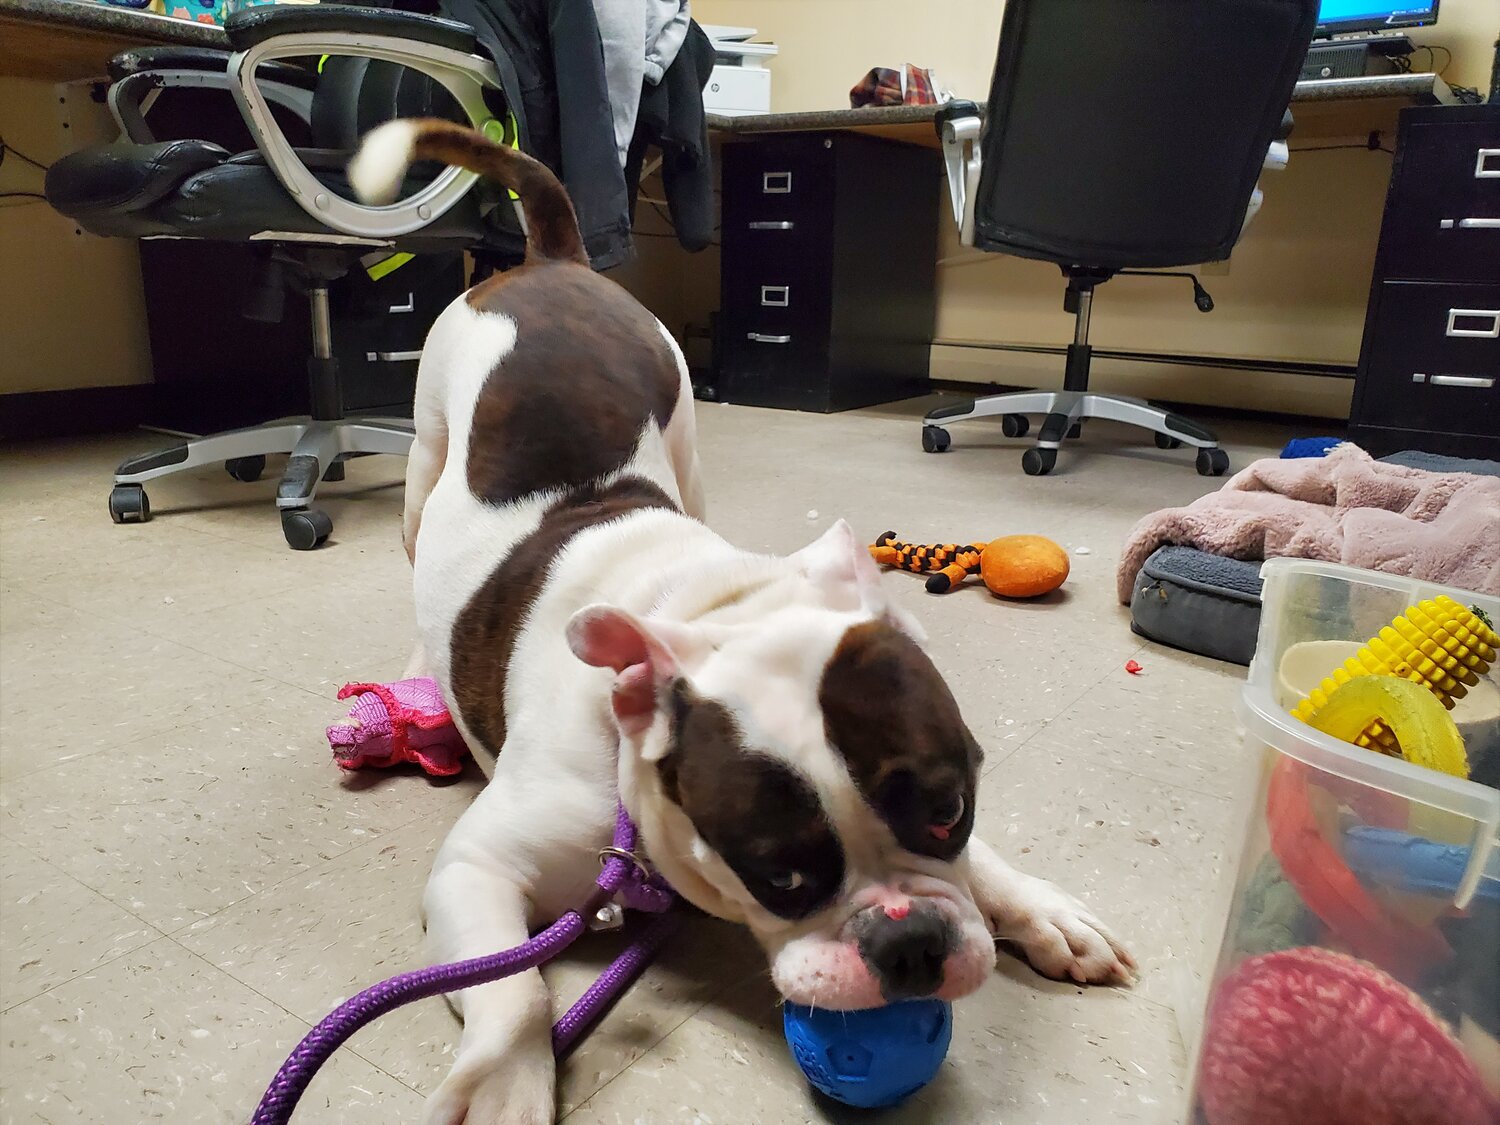 NEW DESIGNATION: One-year-old bulldog Logan having some playtime in the shelter office.